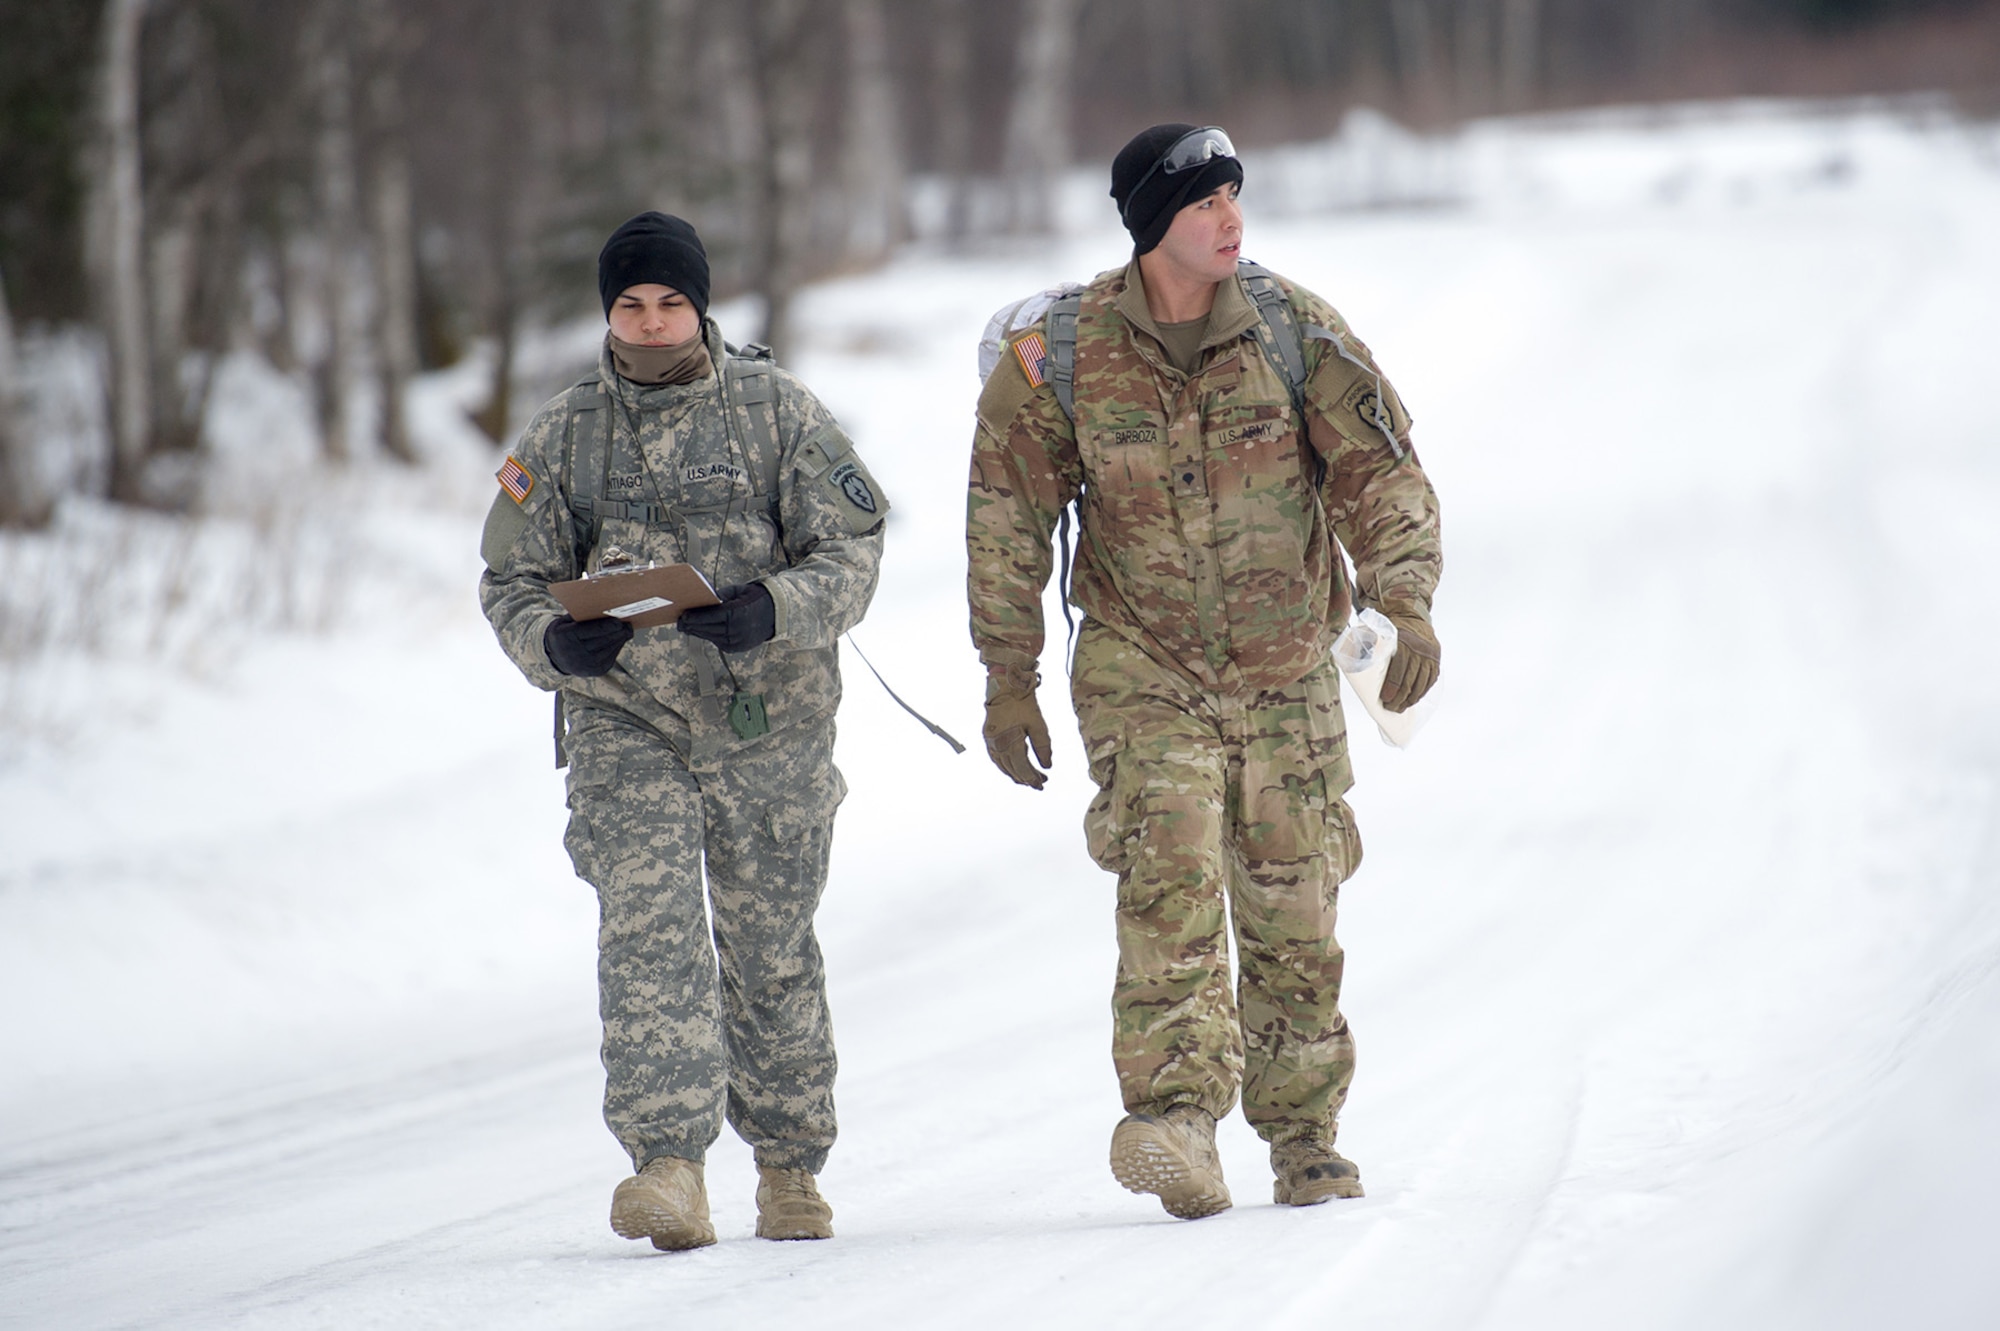 Army Sgt. Gary Santiago,and Spc. Alejandro Barboza, both assigned to Hawk Company,3rd Battalion, 509th Parachute Infantry Regiment, 4th Infantry Brigade Combat Team (Airborne), 25th Infantry Division, U.S. Army Alaska, conduct a land navigation course on Joint Base Elmendorf-Richardson, Alaska, April 4, 2018.  The Soldiers used their skills to plot courses using a lensatic compass, protractor, and a 1:25,000 scale map to navigate to, and locate points using provided grid coordinates within a predetermined time.